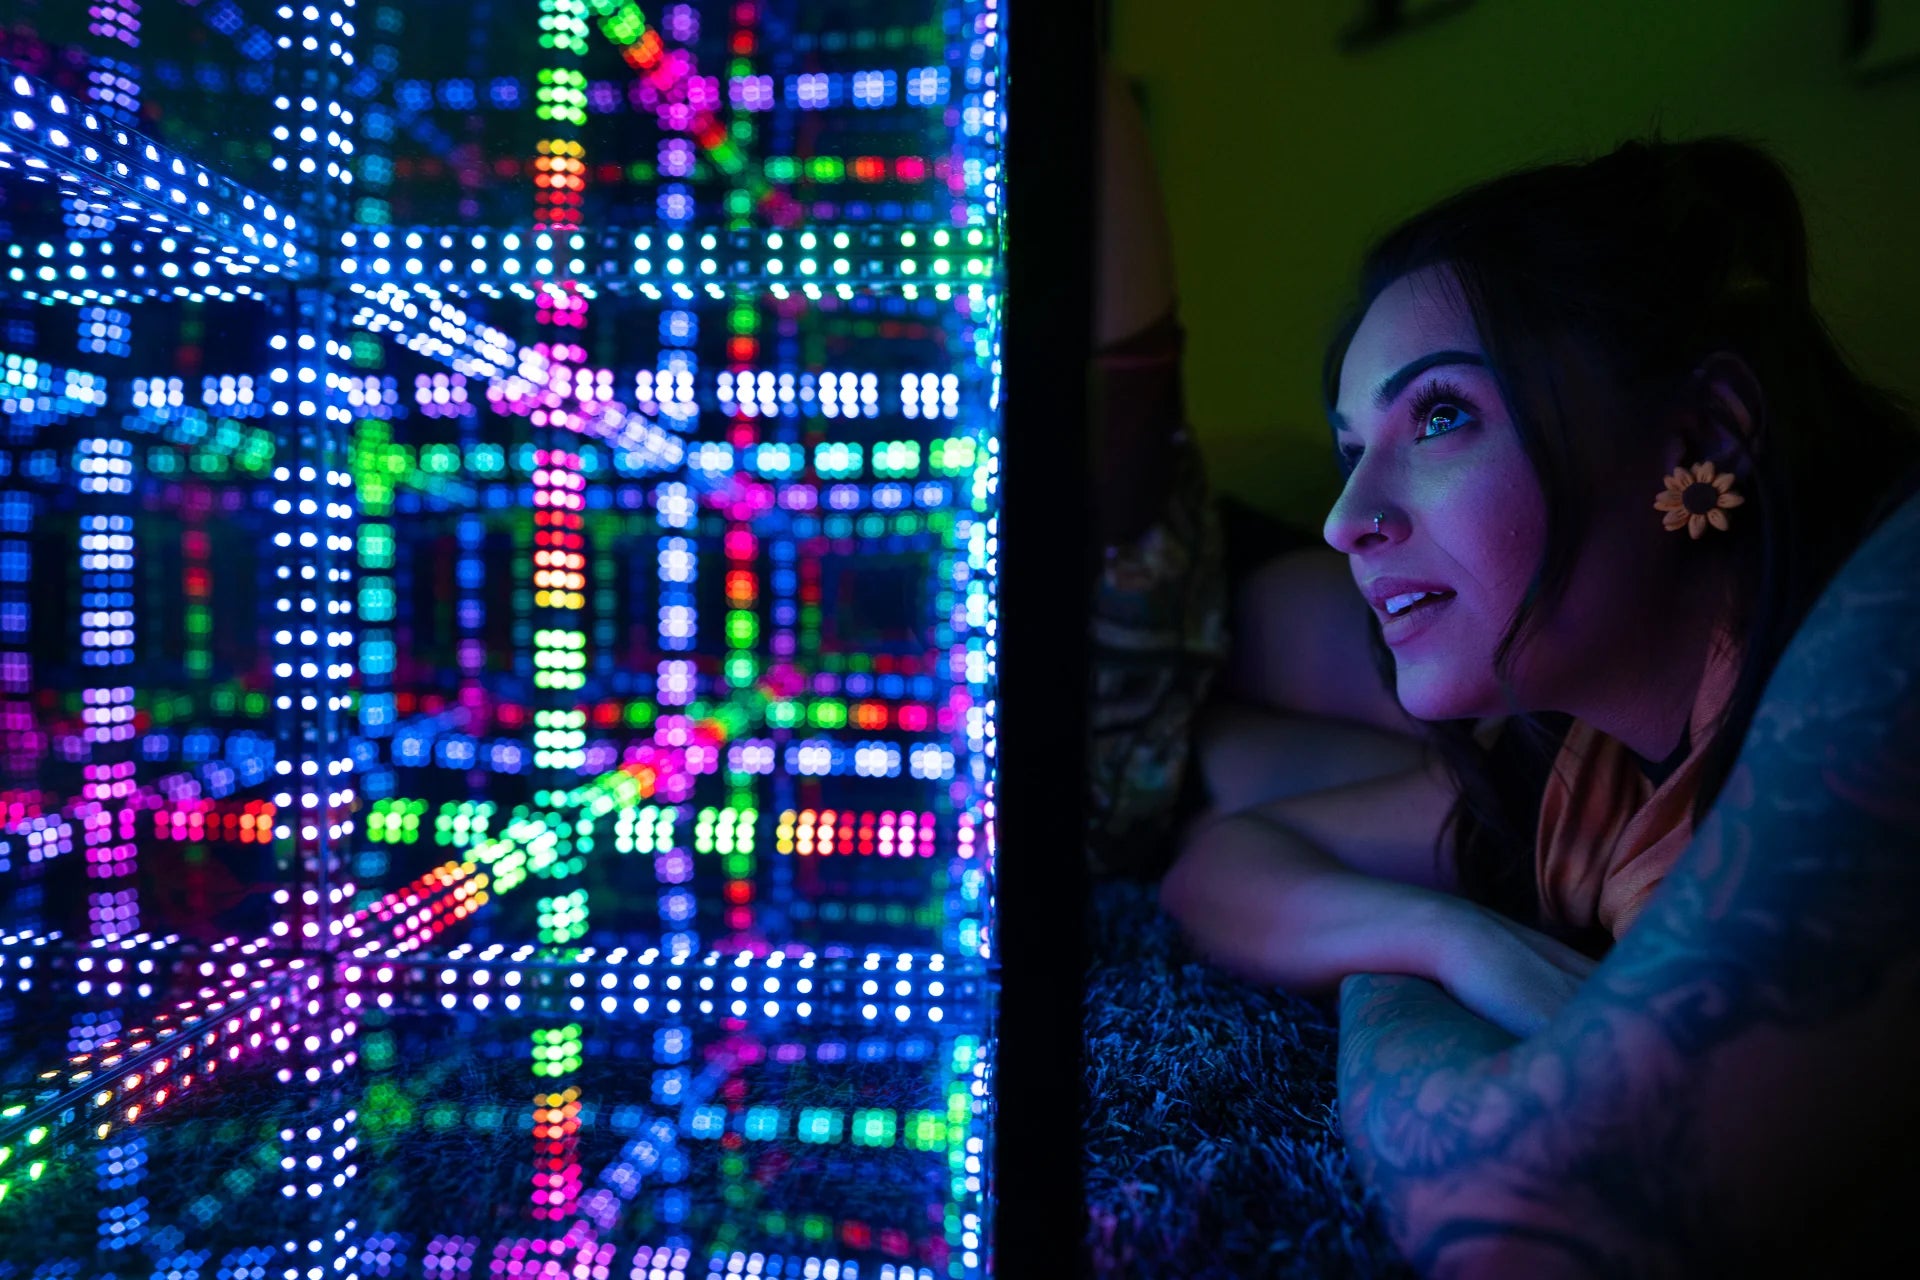 girl staring into cube with led light bulb